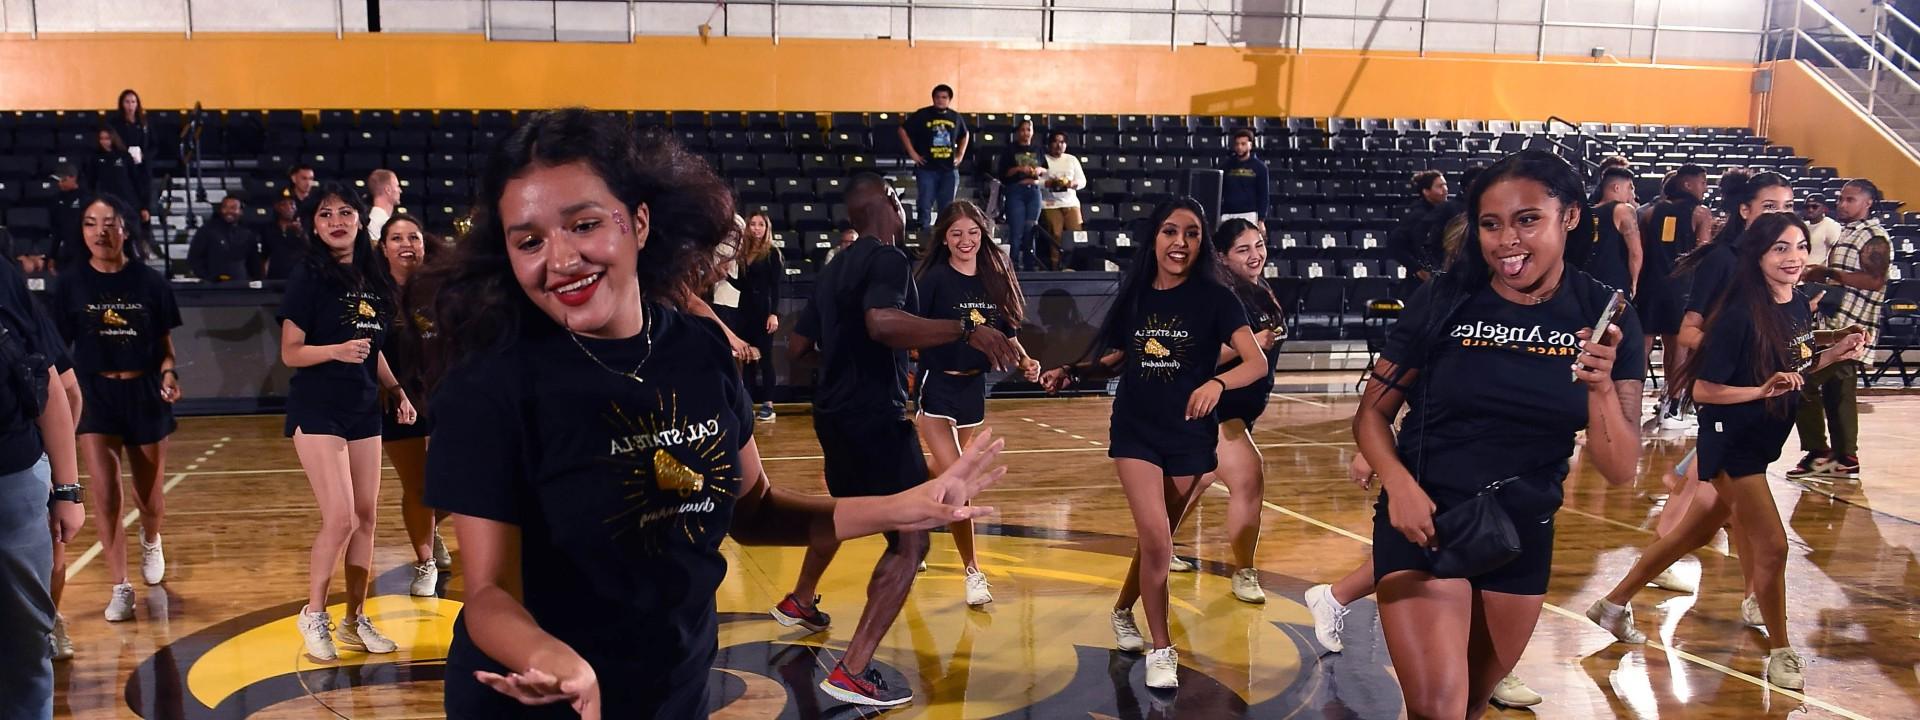 Dance team in identical t-shirts and shorts smiling mid-dance step.